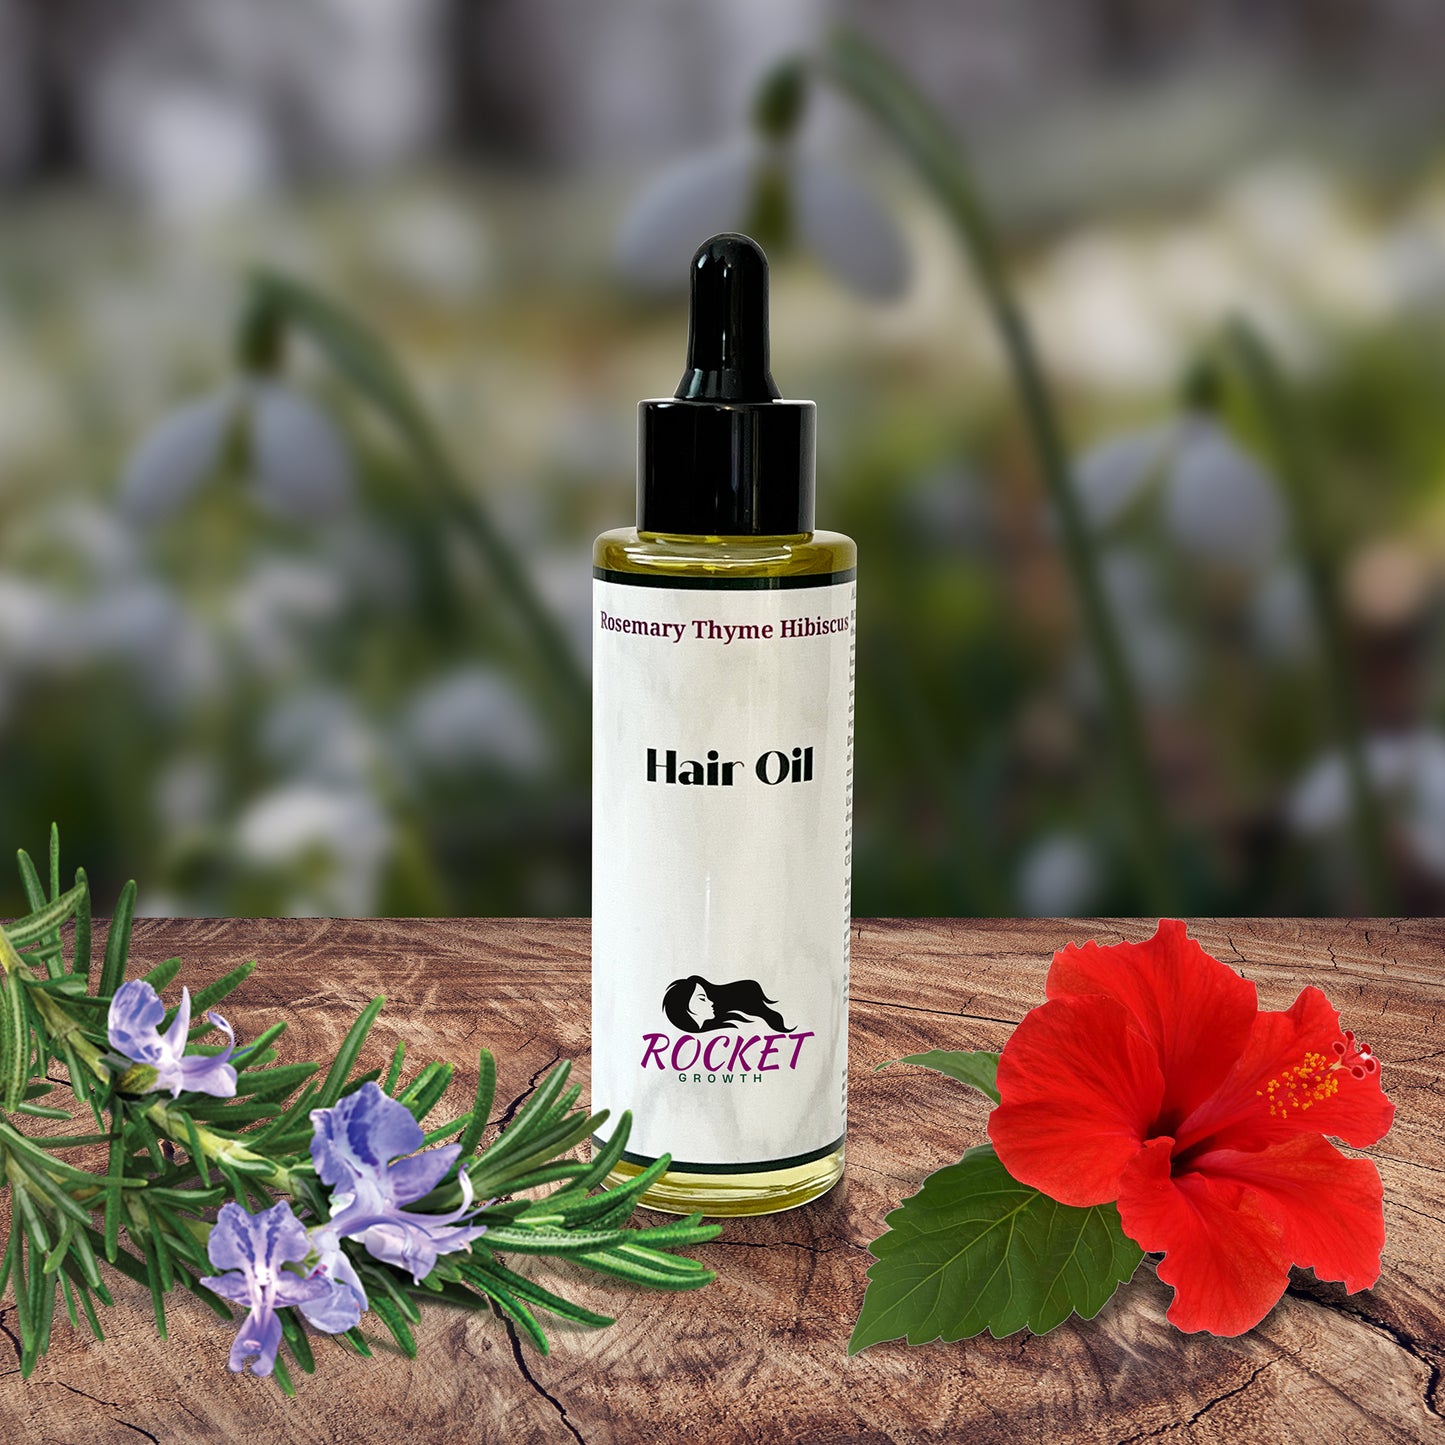 Rocket Growth Rosemary Thyme Hibiscus Hair Oil